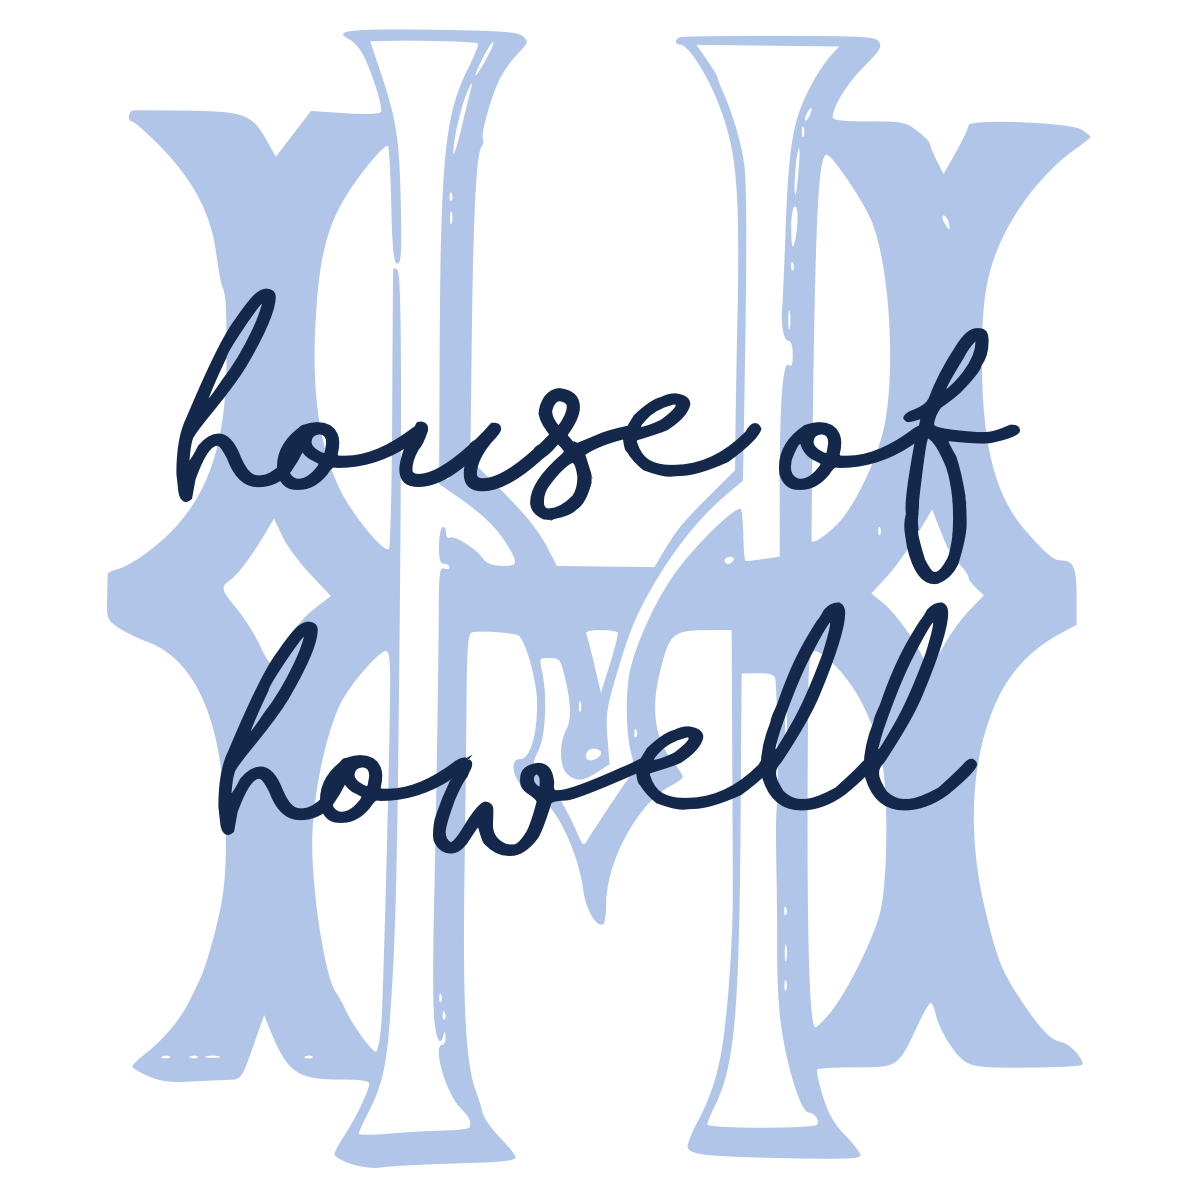 House of Howell